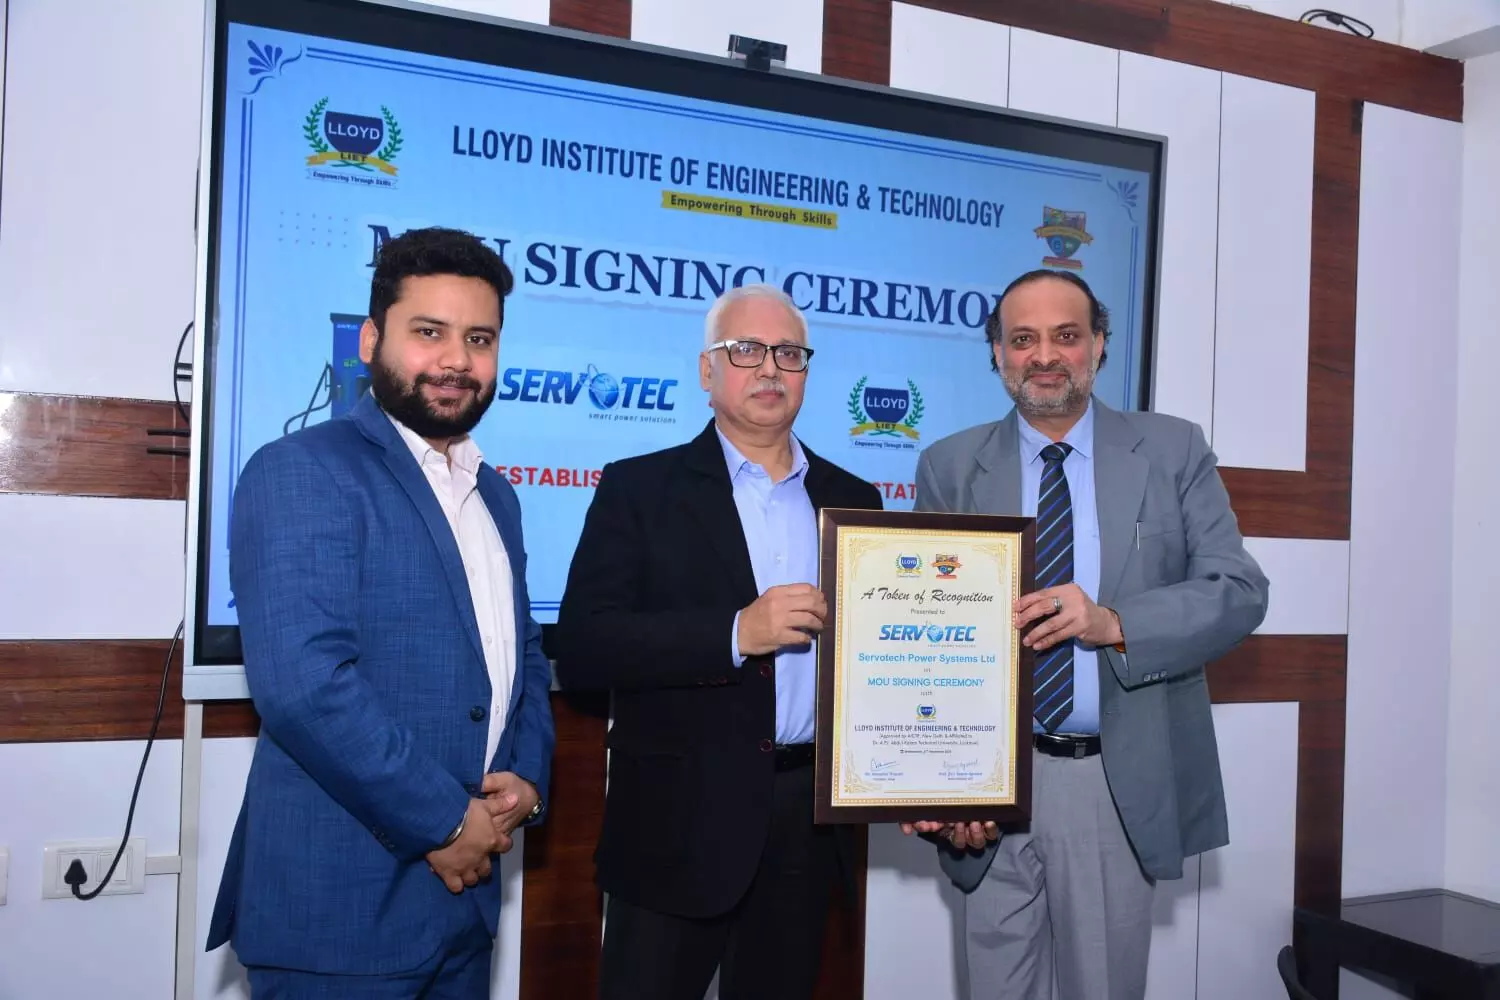 Servotech to establish EV Charging R&D Lab and Centre of Excellence for Students & EV Charging Station at LLOYD Campus, signs MoU